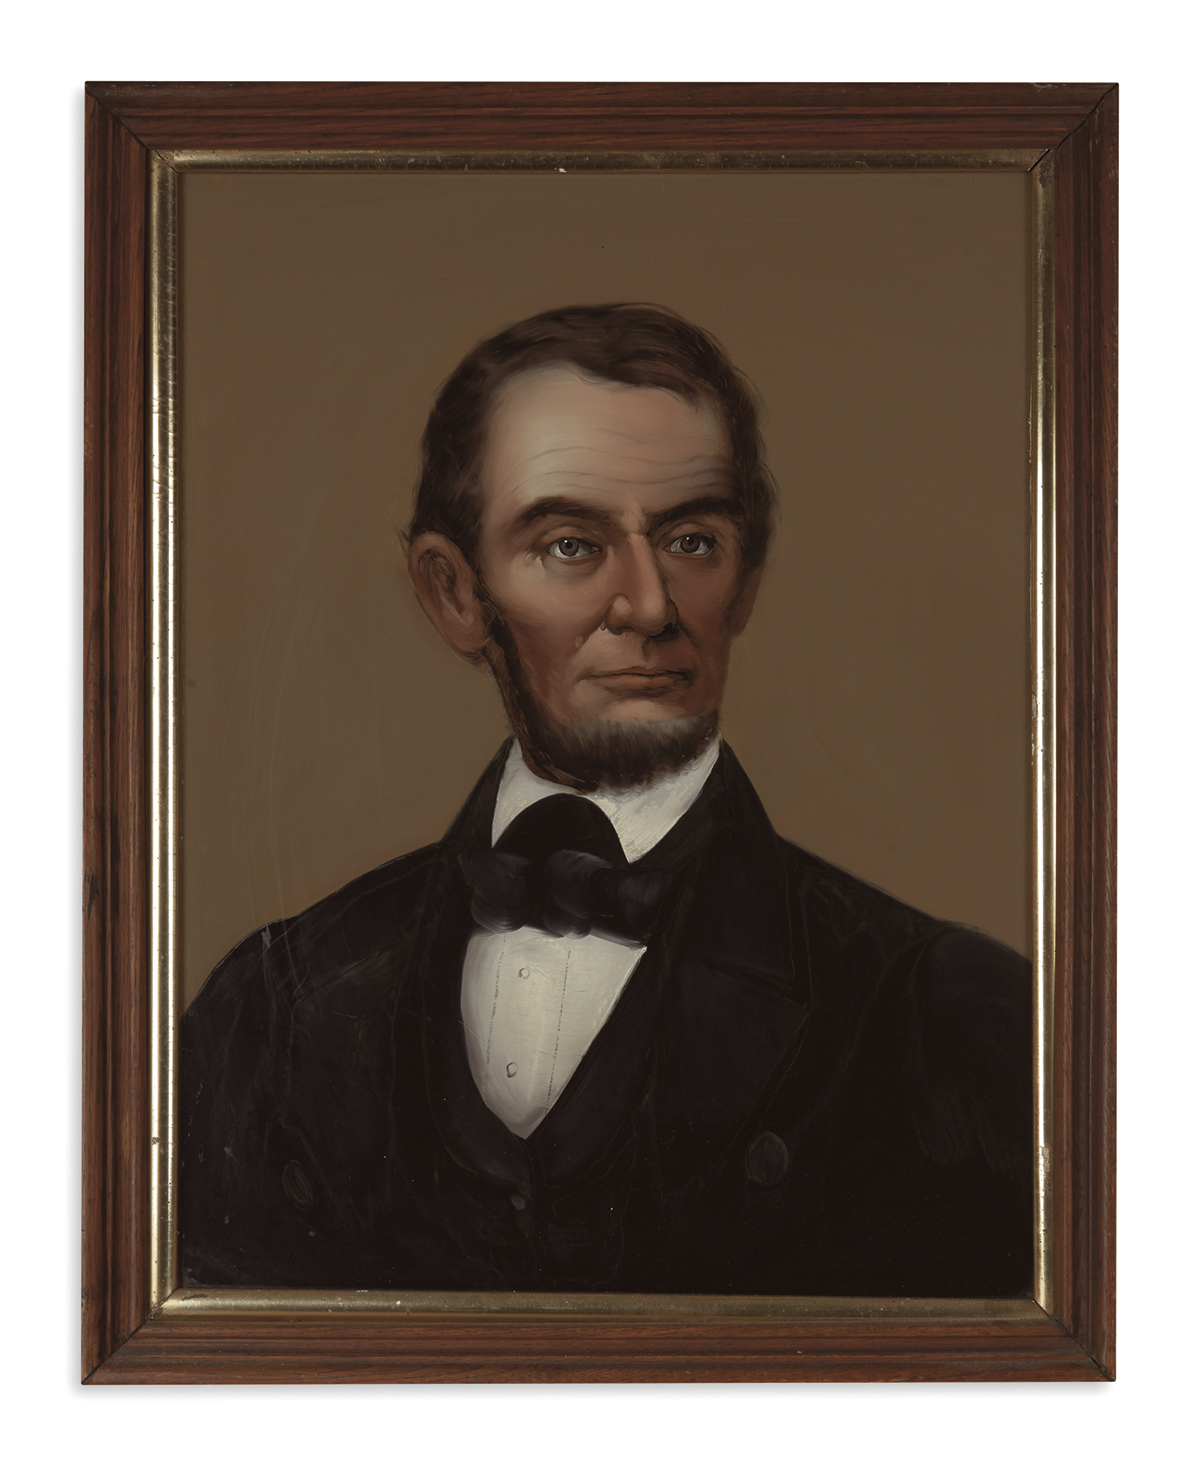 (PAINTINGS.) [Prior, William M.?] Reverse glass portrait of Lincoln.